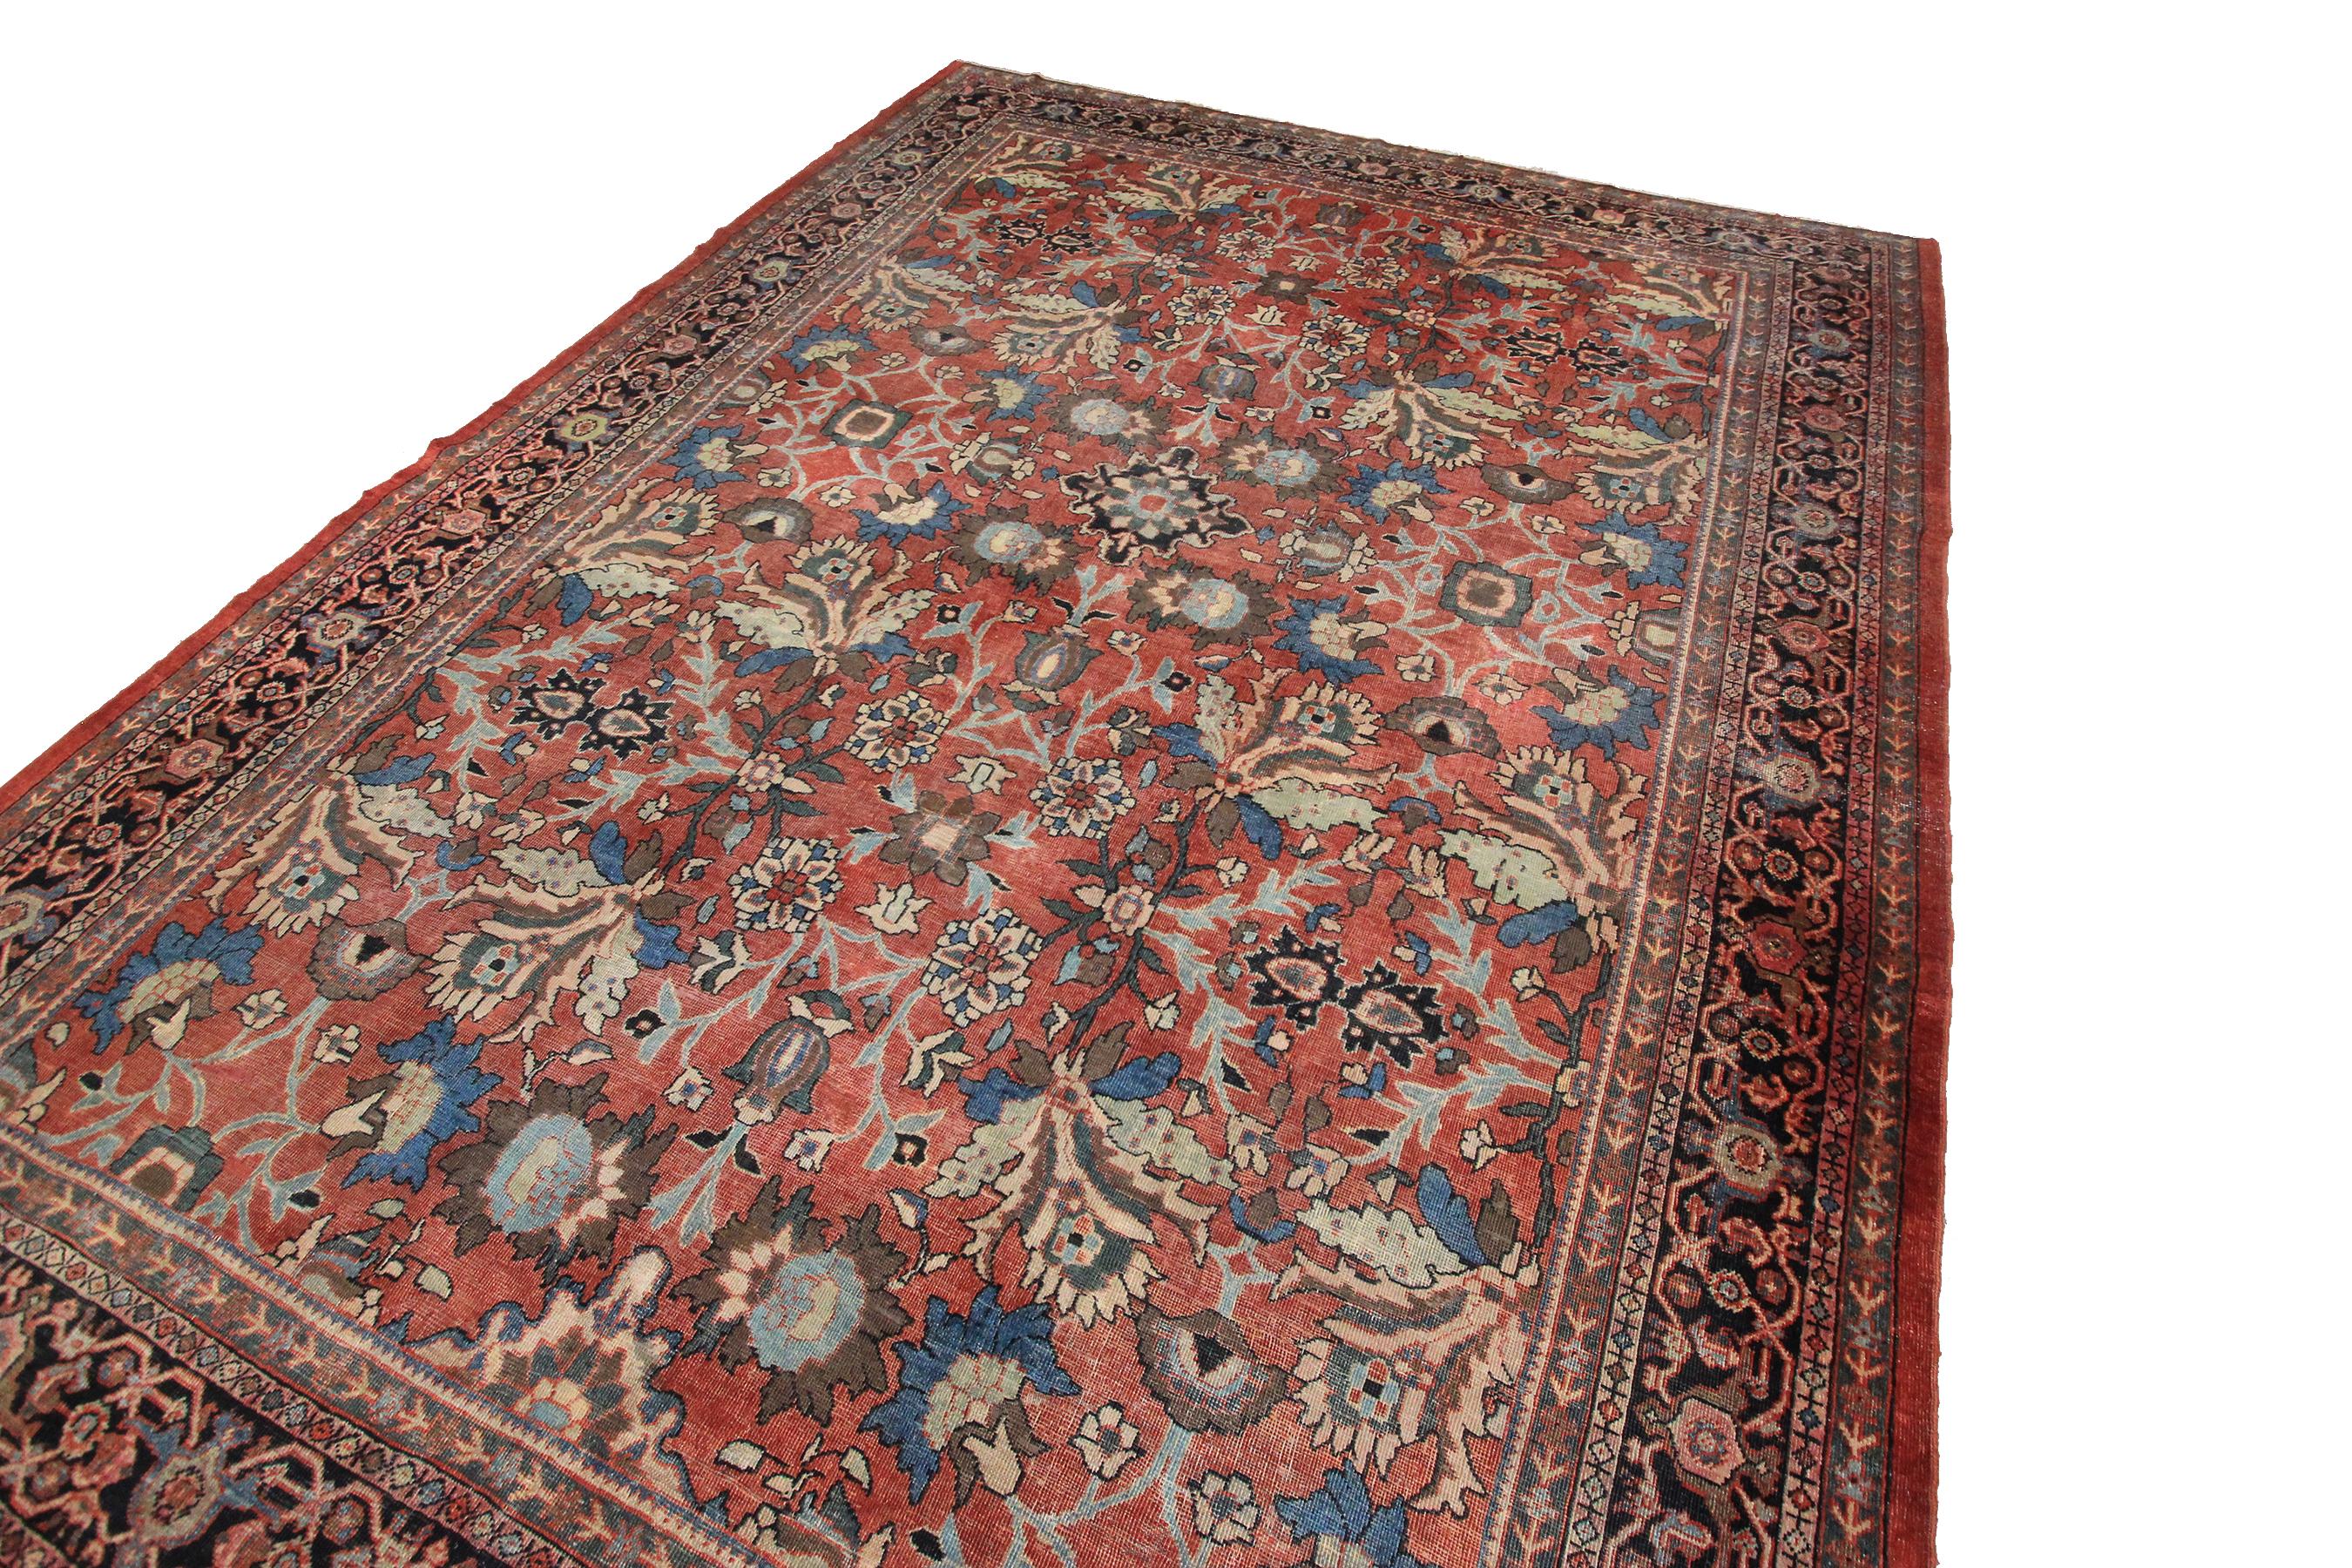 Hand-Knotted Antique Persian Sultanabad Rug Antique Mahal Geometric Overall